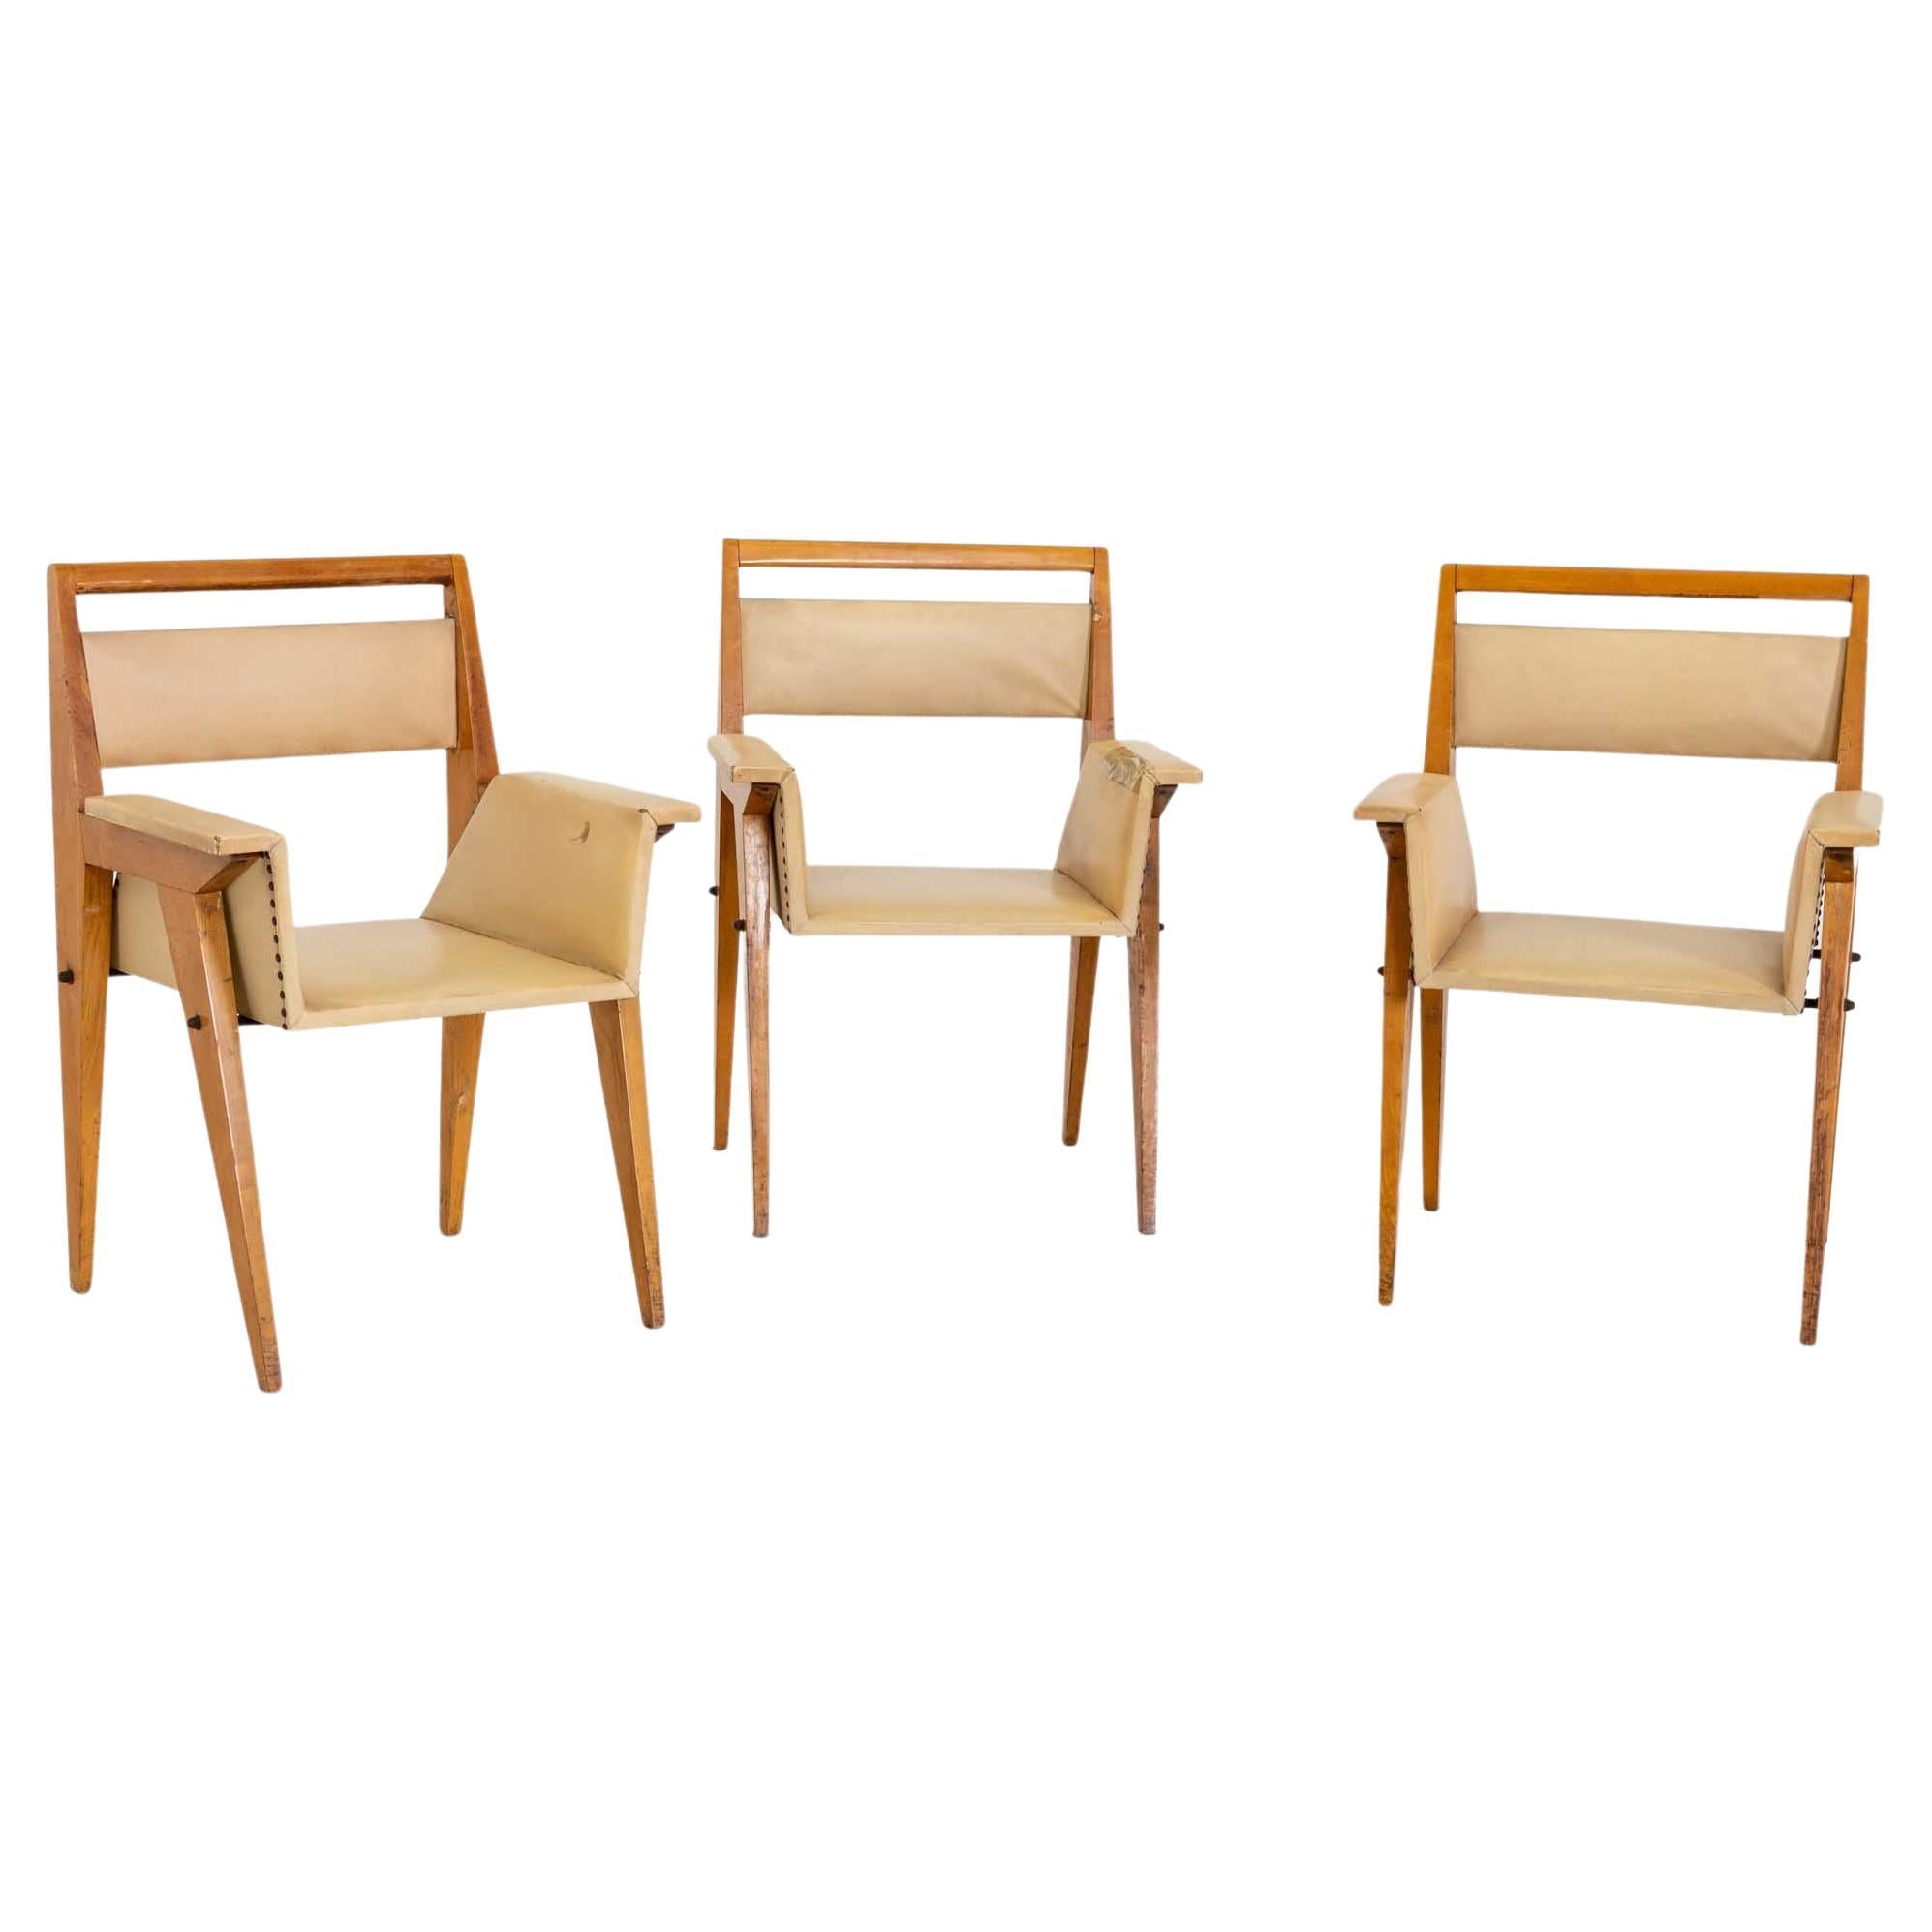 Armchairs, Designed by Vittorio Armellini, Italy Mid-20th Century For Sale